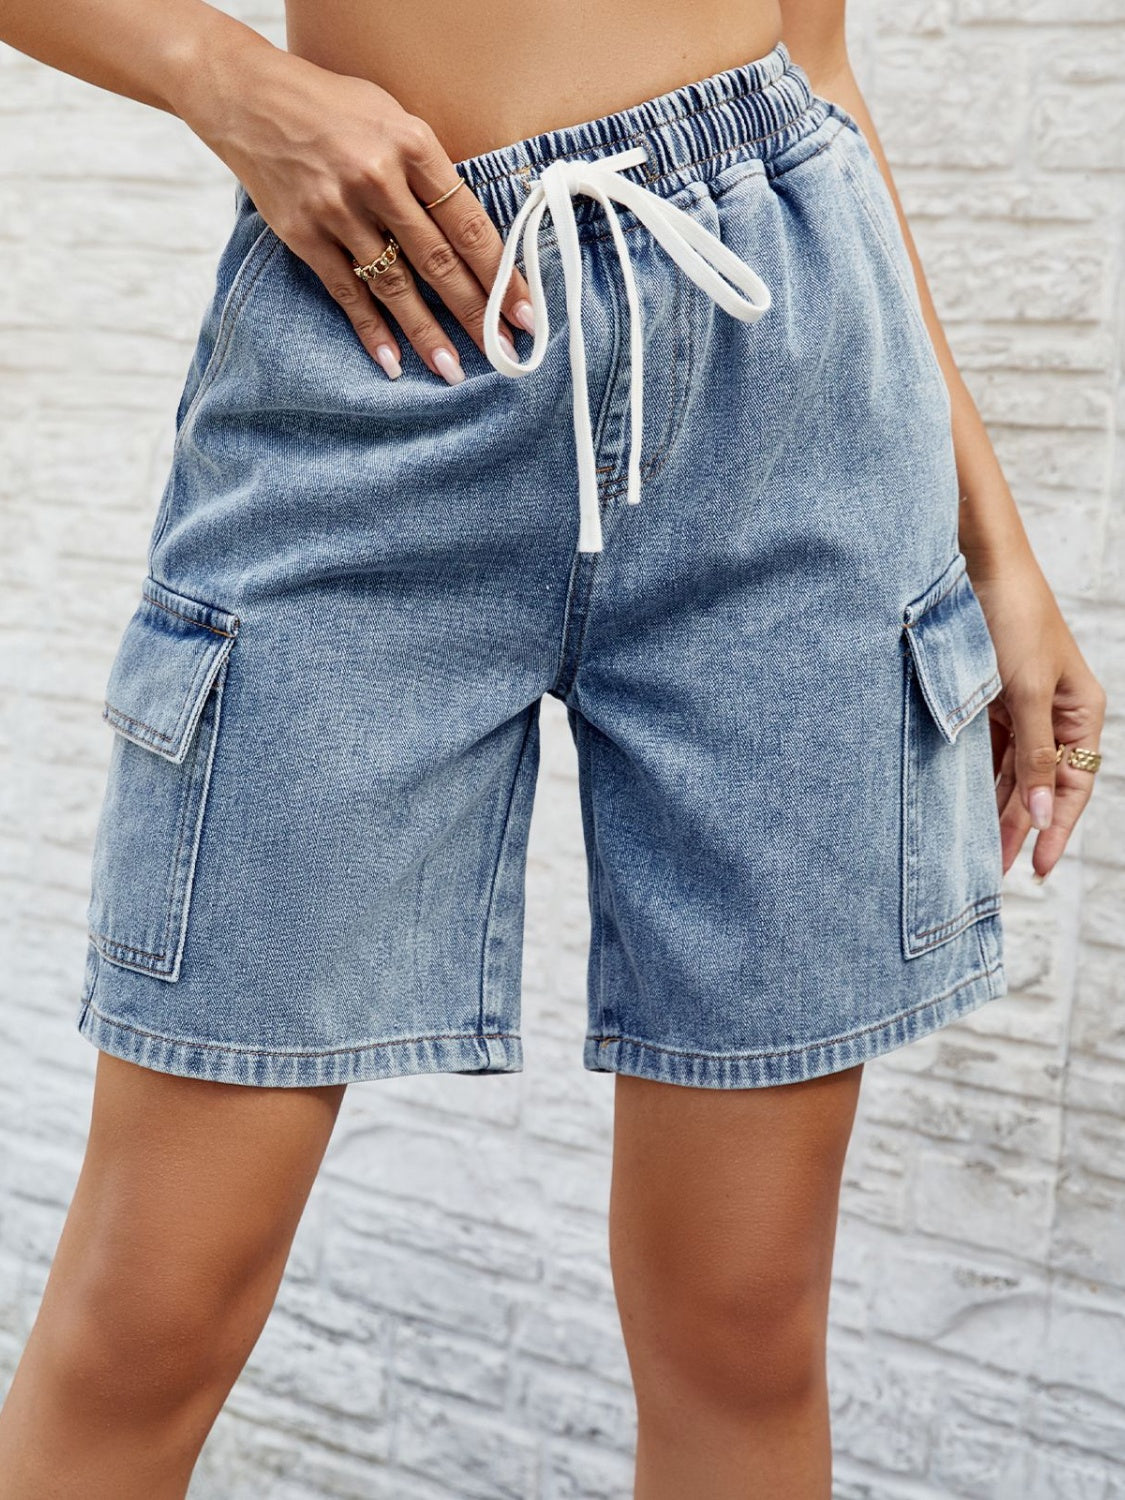 Women's Clothing, Drawstring Denim Shorts with Pockets, Front View Hand on Elastic, Rochelle's House